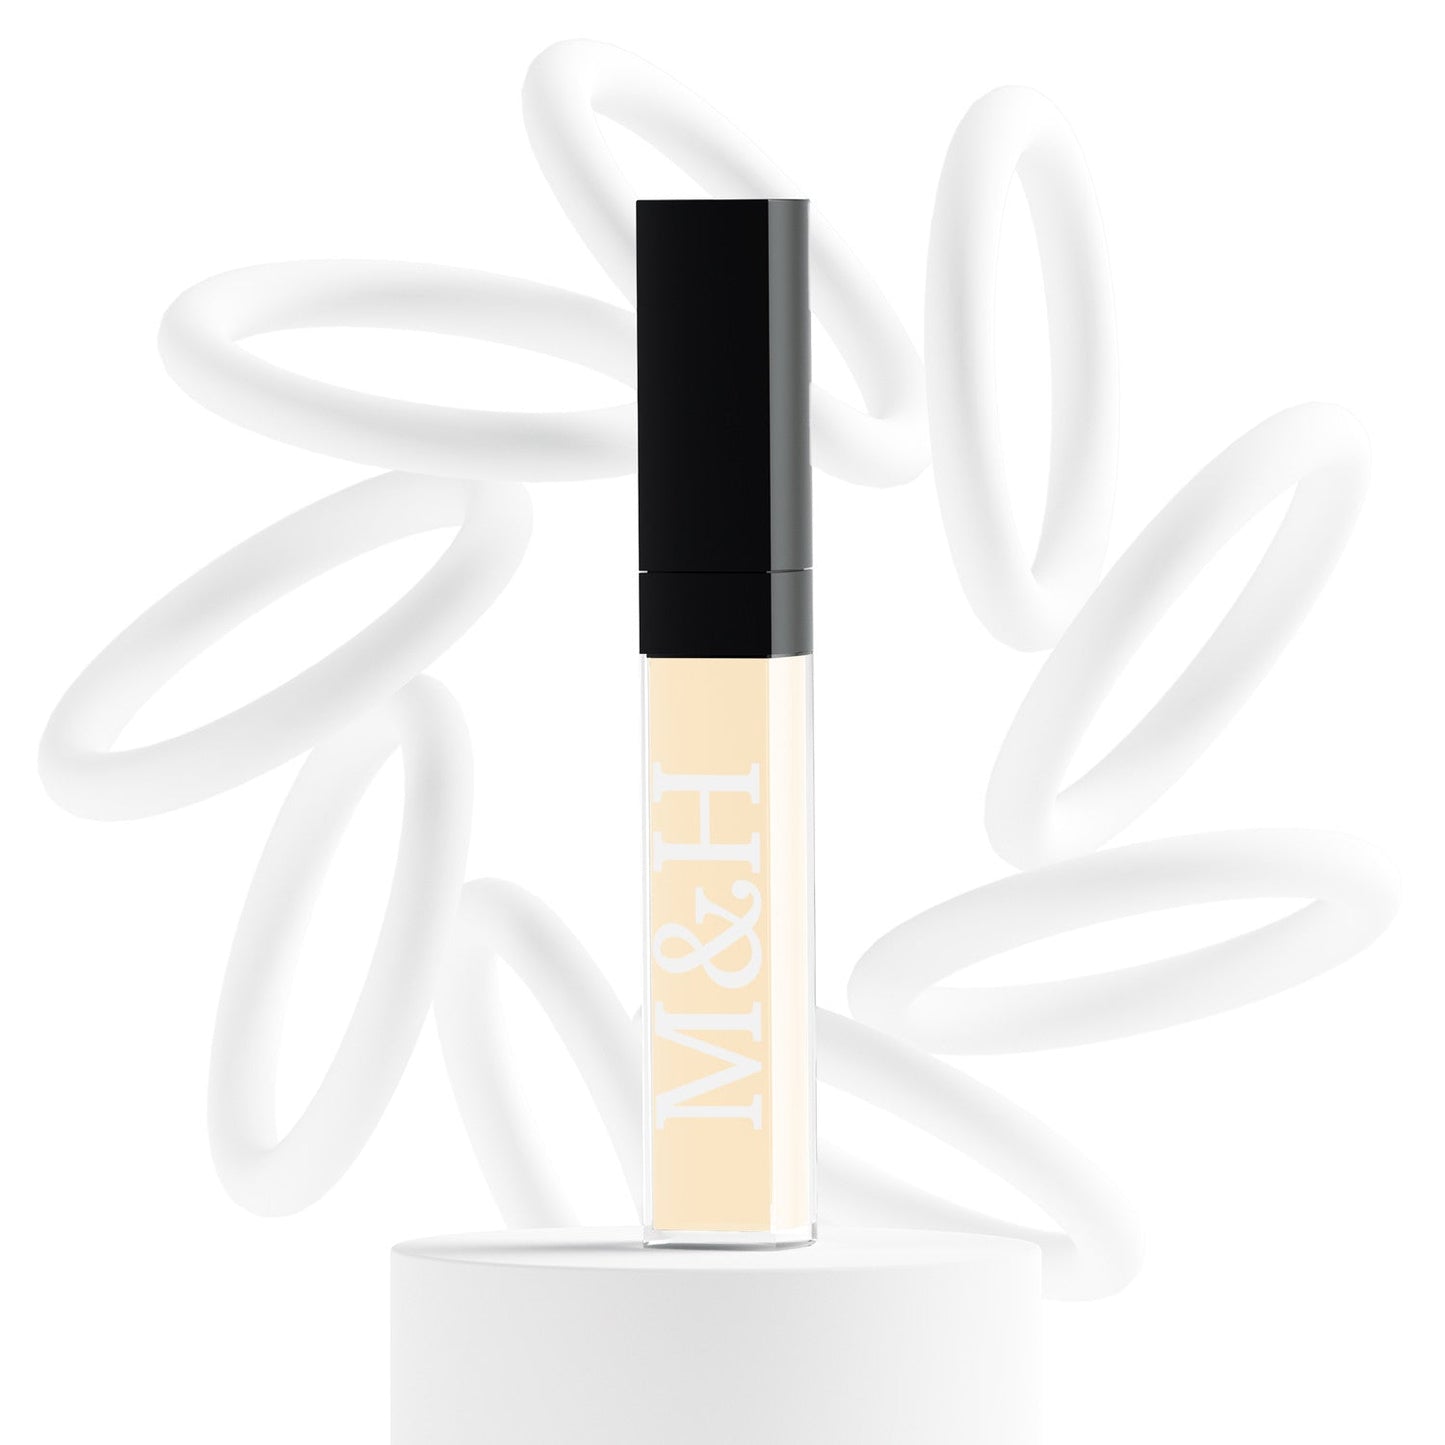 Cool-tone Concealers - M&H FashionCool-tone Concealersconcealer-coolM&H FashionM&H FashionConcealer-951IvoryCool-tone ConcealersM&H Fashionconcealer-coolM&H Fashion This multifunctional concealer is designed to cover under-eye circles, complexion alterations, and major imperfections like scars, hyperpigmentation, burns, and tatCool-tone Concealers